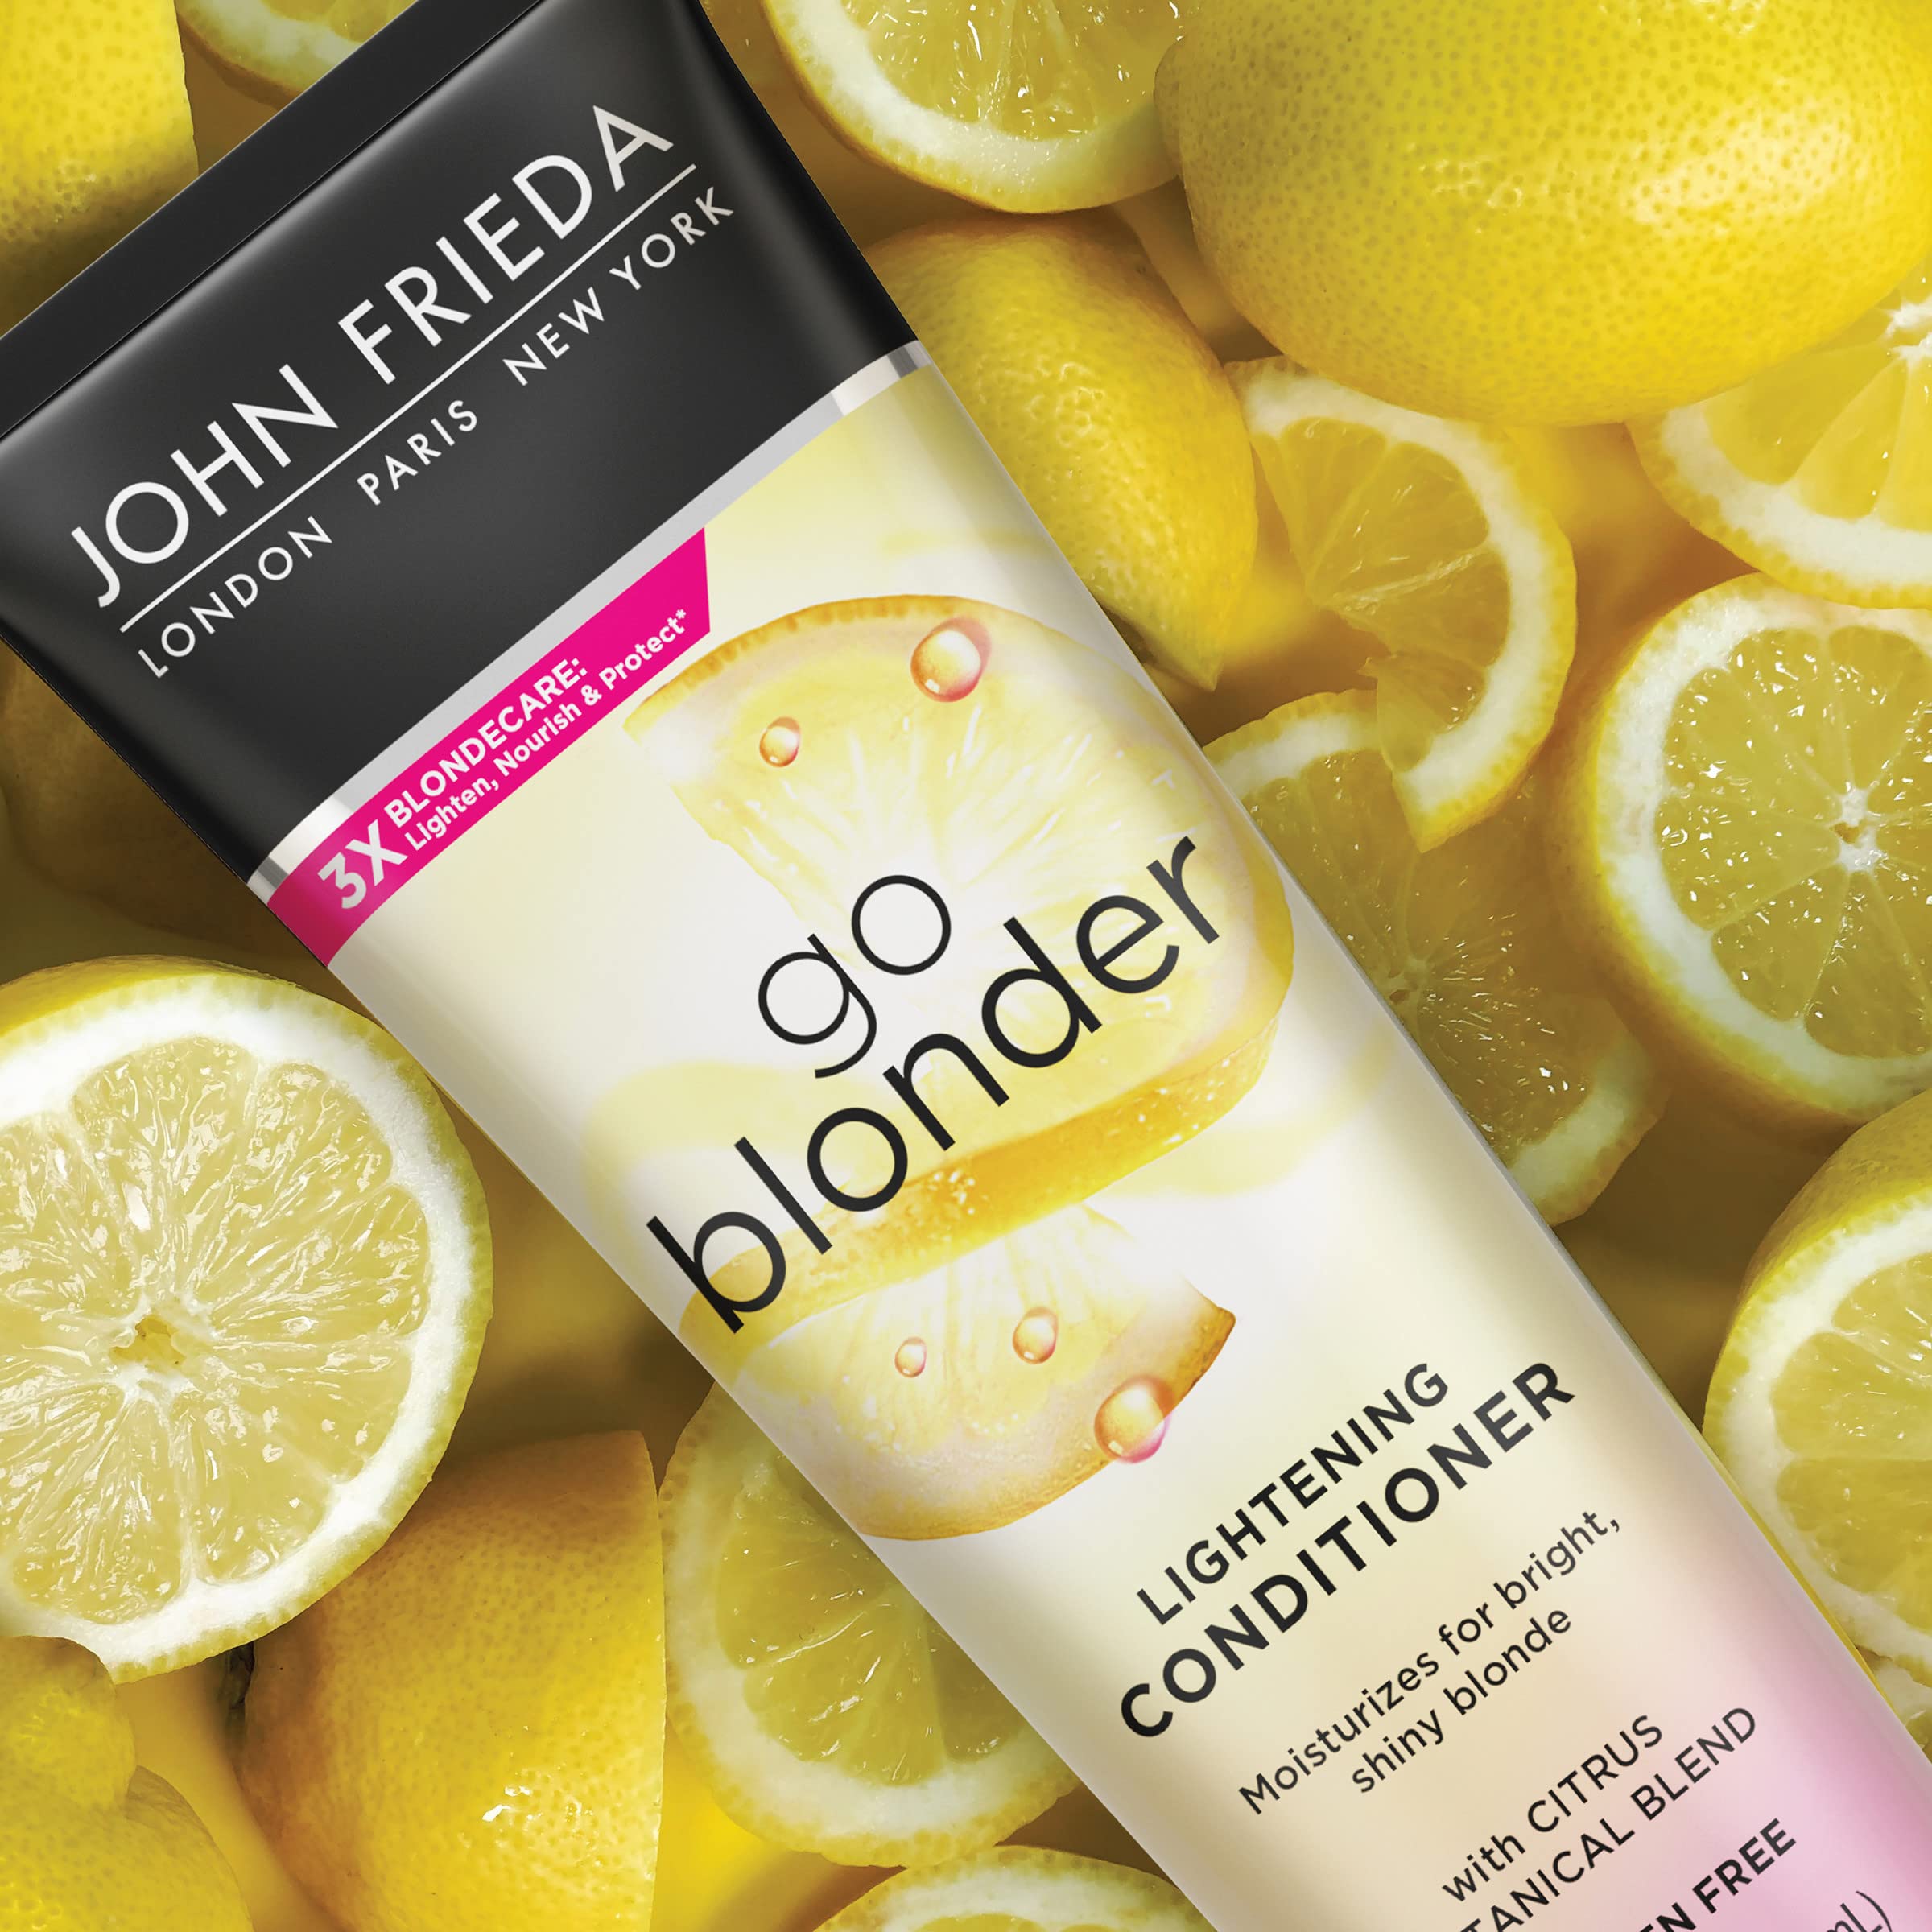 John Frieda Sheer Blonde Go Blonder Conditioner, Gradual Lightening Conditioner, 8.3 oz, with Citrus and Chamomile, featuring our BlondMend Technology